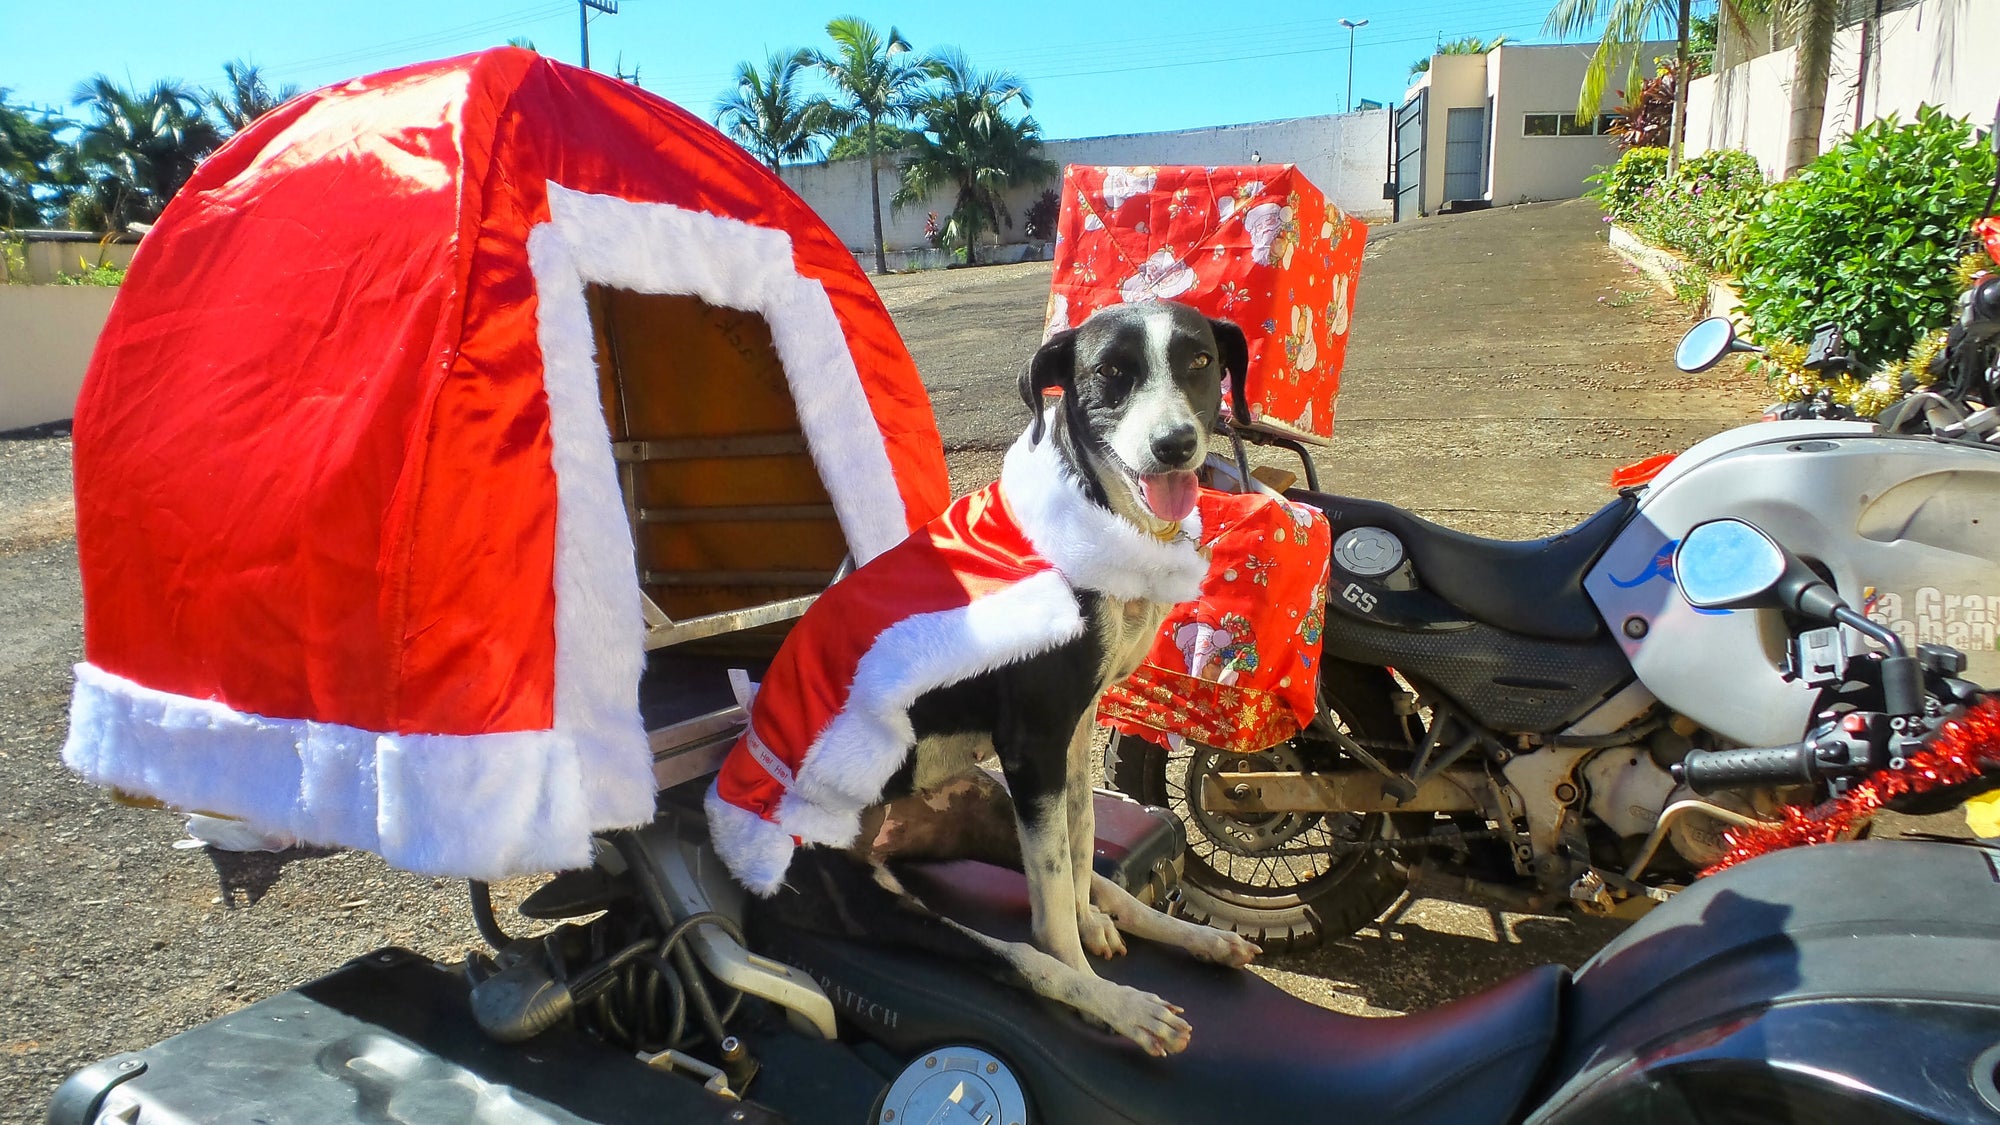 The Pack Track love celebrating Christmas. Janell went all out hand making the Christmas covers for panniers, topbox, Pillion Pooch and Weeti's jacket.